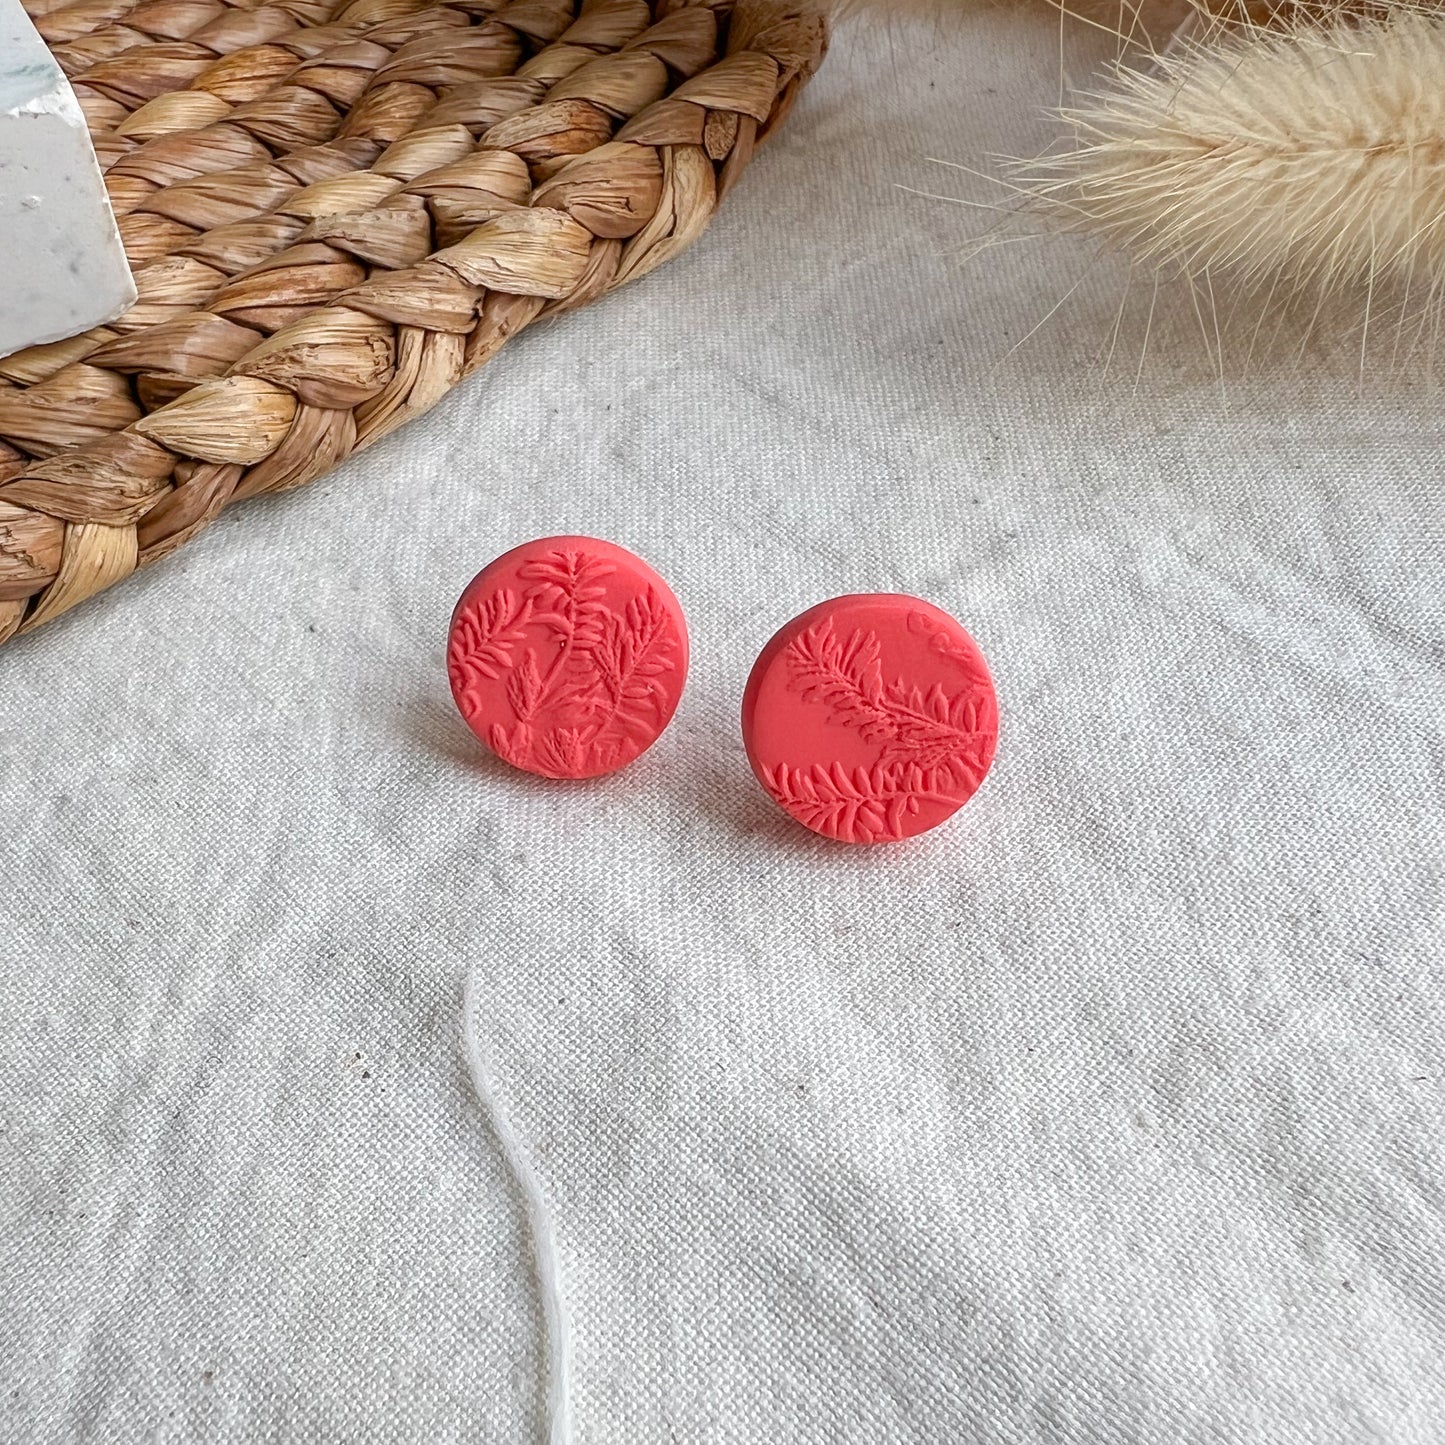 ROUND | Medium round leaf textured stud earrings in bright coral red